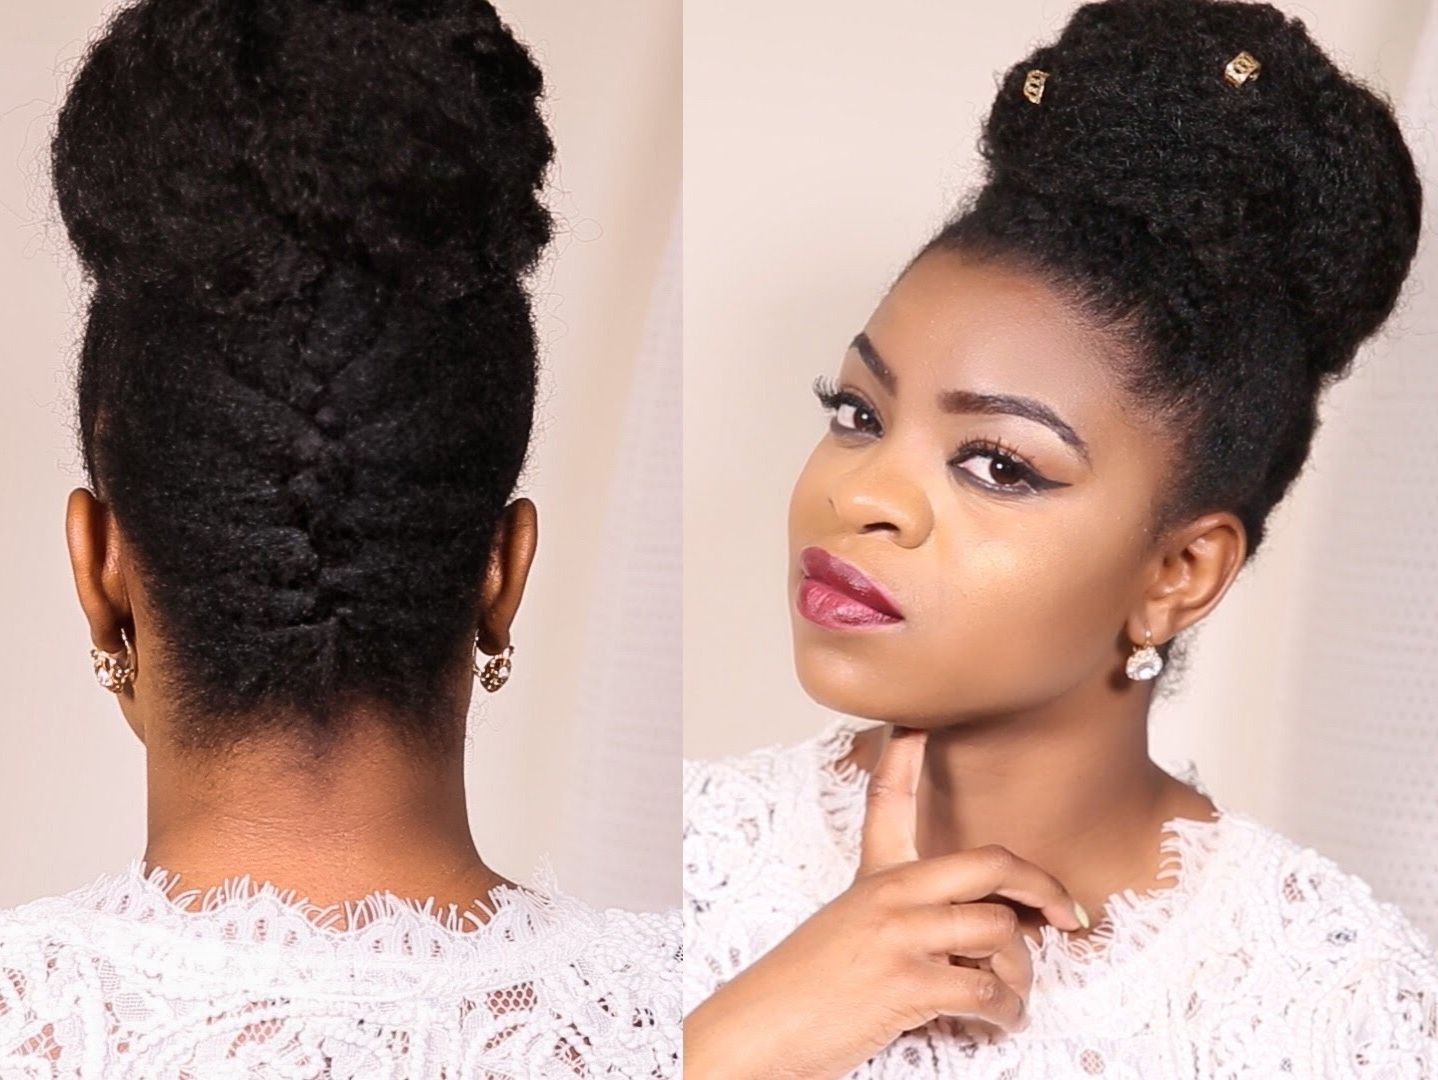 French Braided Updo Bun On 4b/c Natural Hair  Protective Styling Regarding Natural Updo Bun Hairstyles (View 1 of 15)